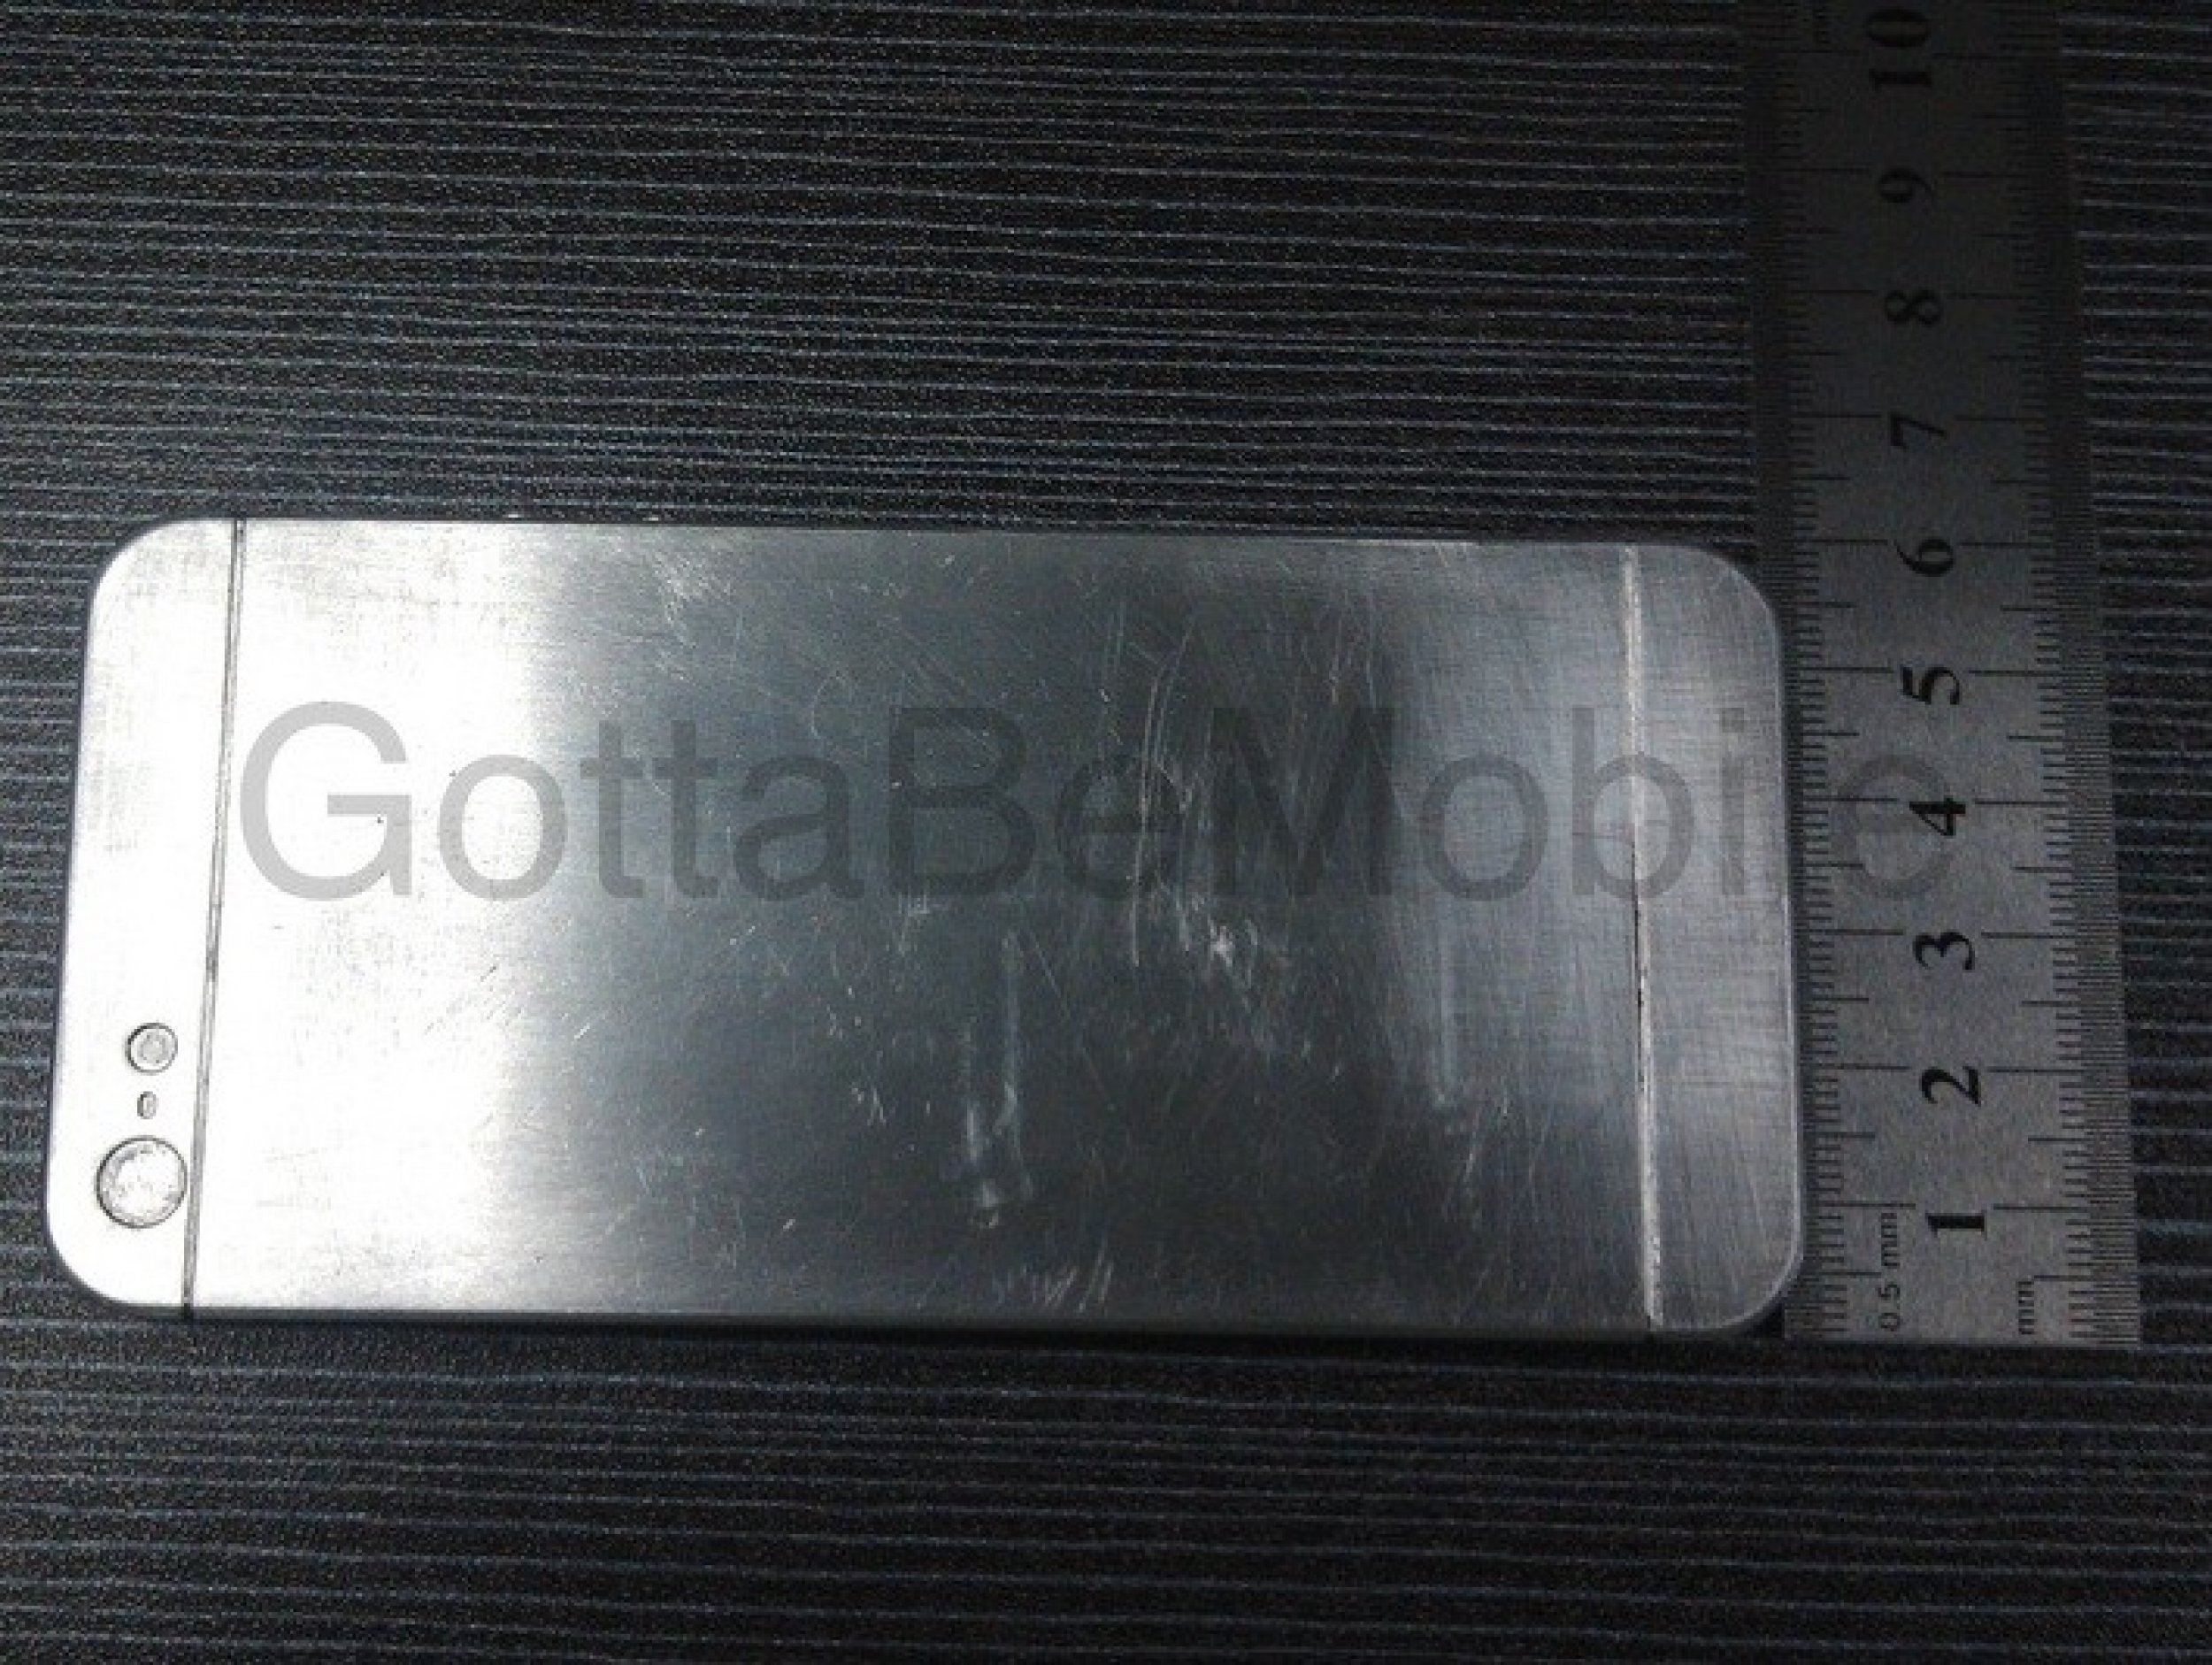 Apple iPhone 5 New Metal Mockup Matches Previously Rumored Features, Specs And Schematics PICTURES